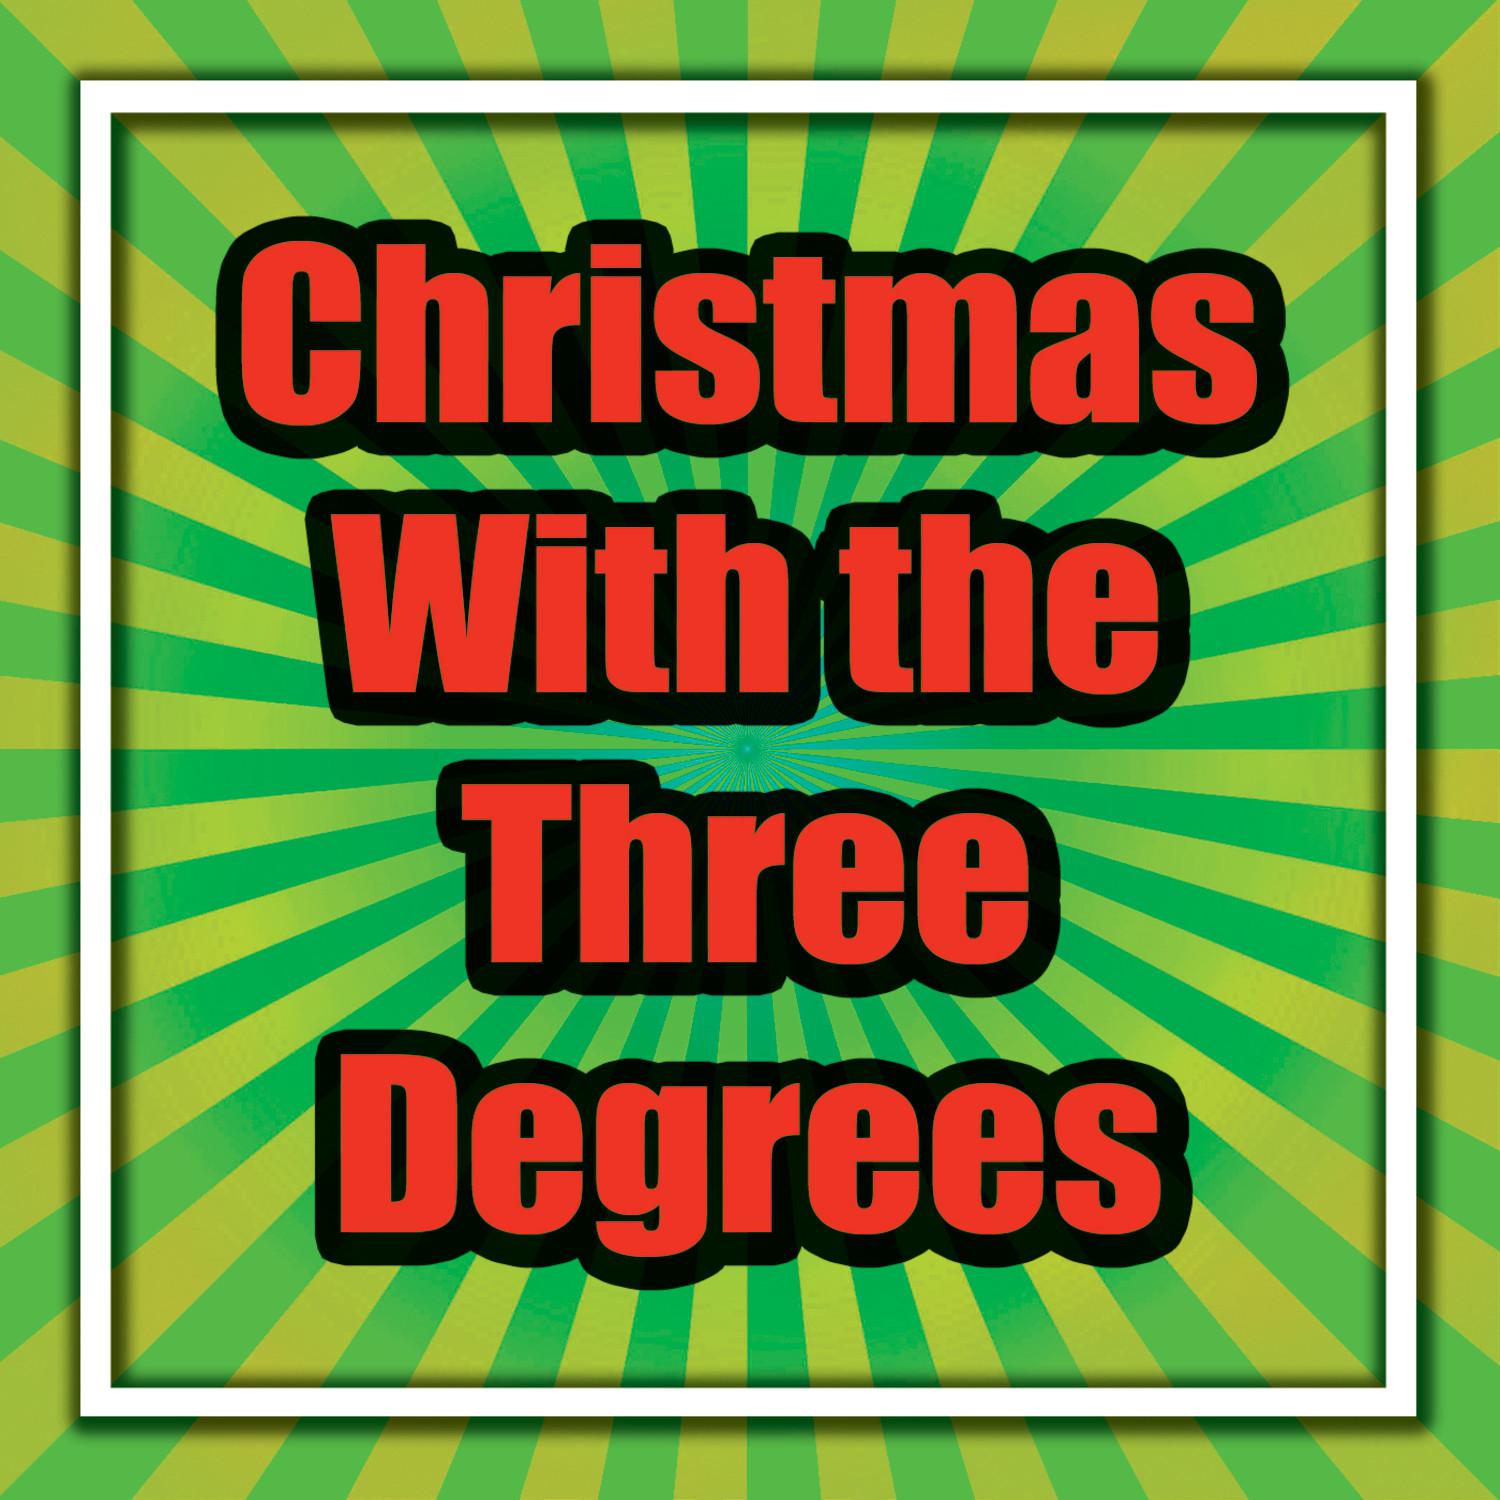 Christmas With the Three Degrees